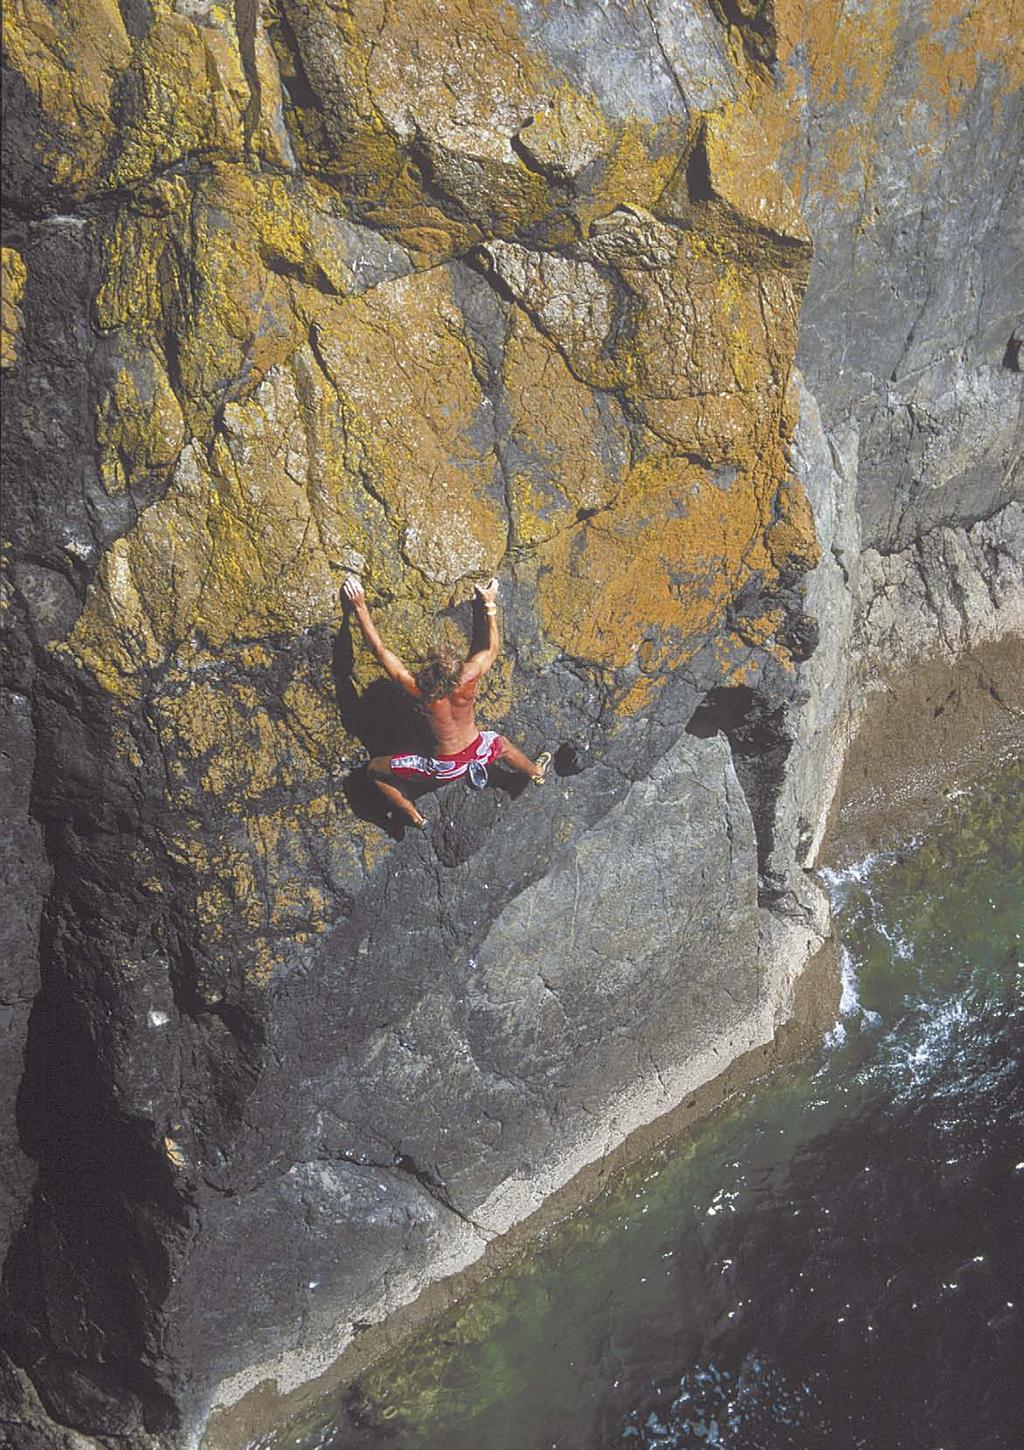 Gavin Symonds on the deceptively difficult Ong-Bak (7b+), the hardest route in